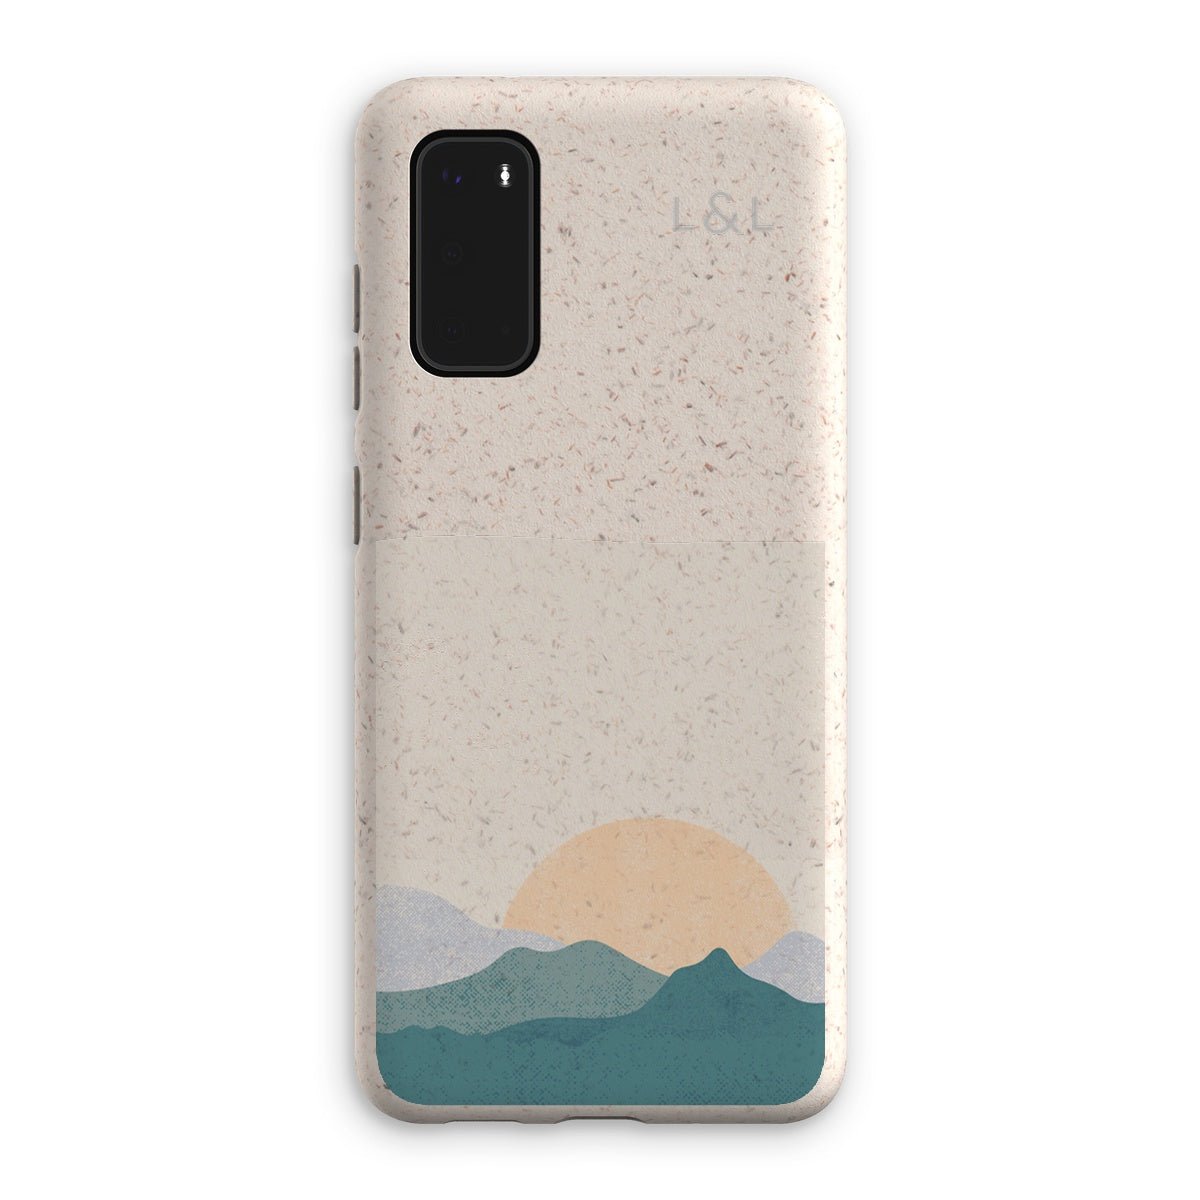 Sunset over the mountain Eco Phone Case - Loam & Lore